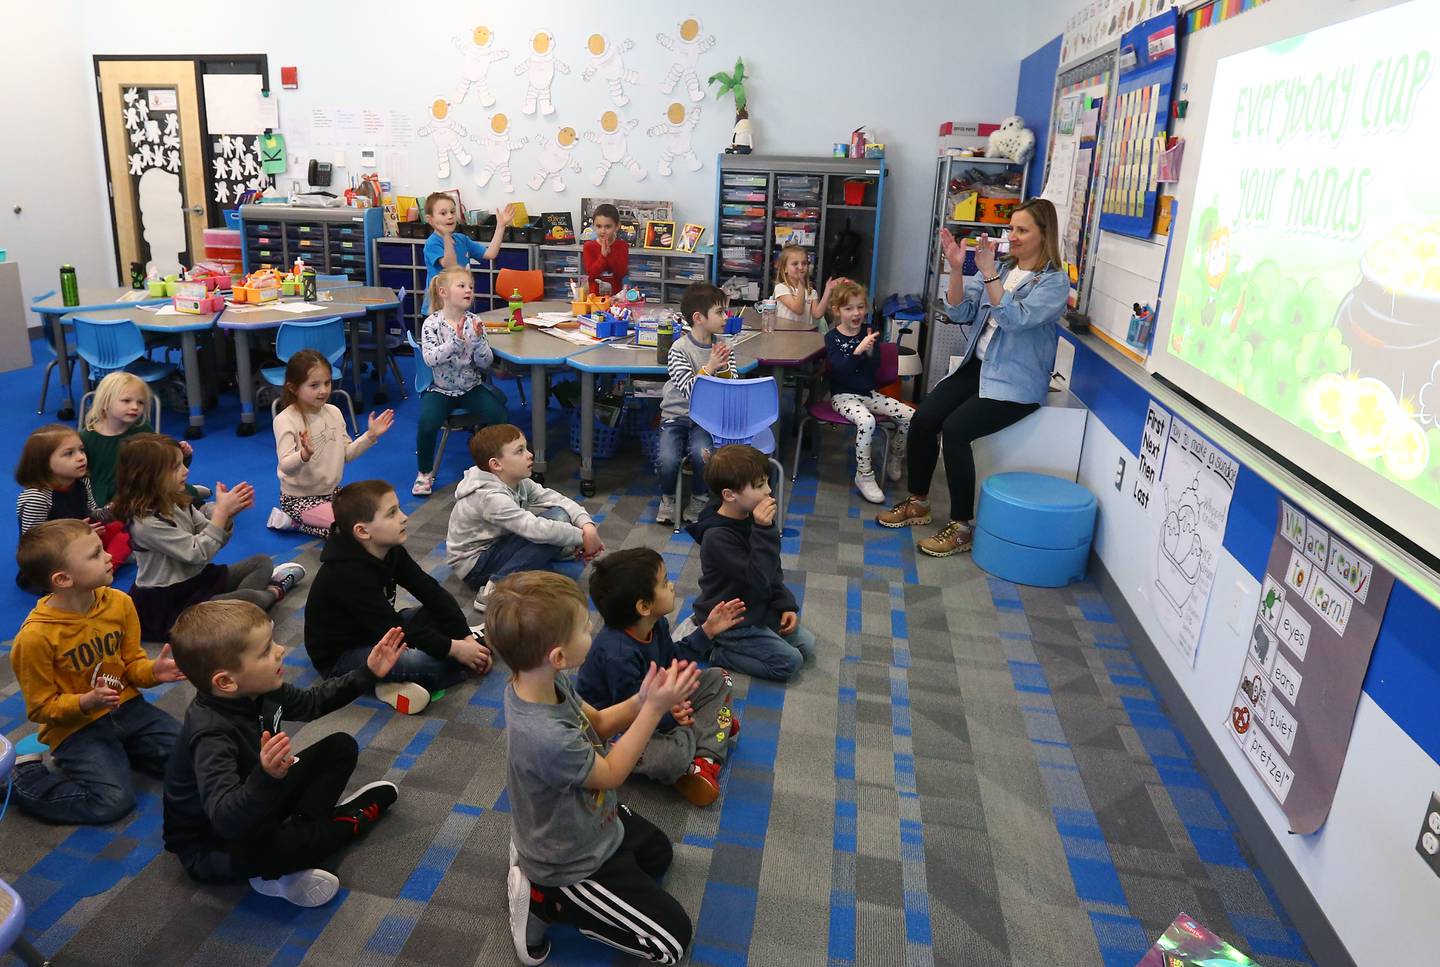 Mrs. Karin Kummer, a kindergartener teacher at Waltham School, teaches her students letters and numbers in a song while using the Smartboard on Tuesday, March 8, 2022 in Utica.